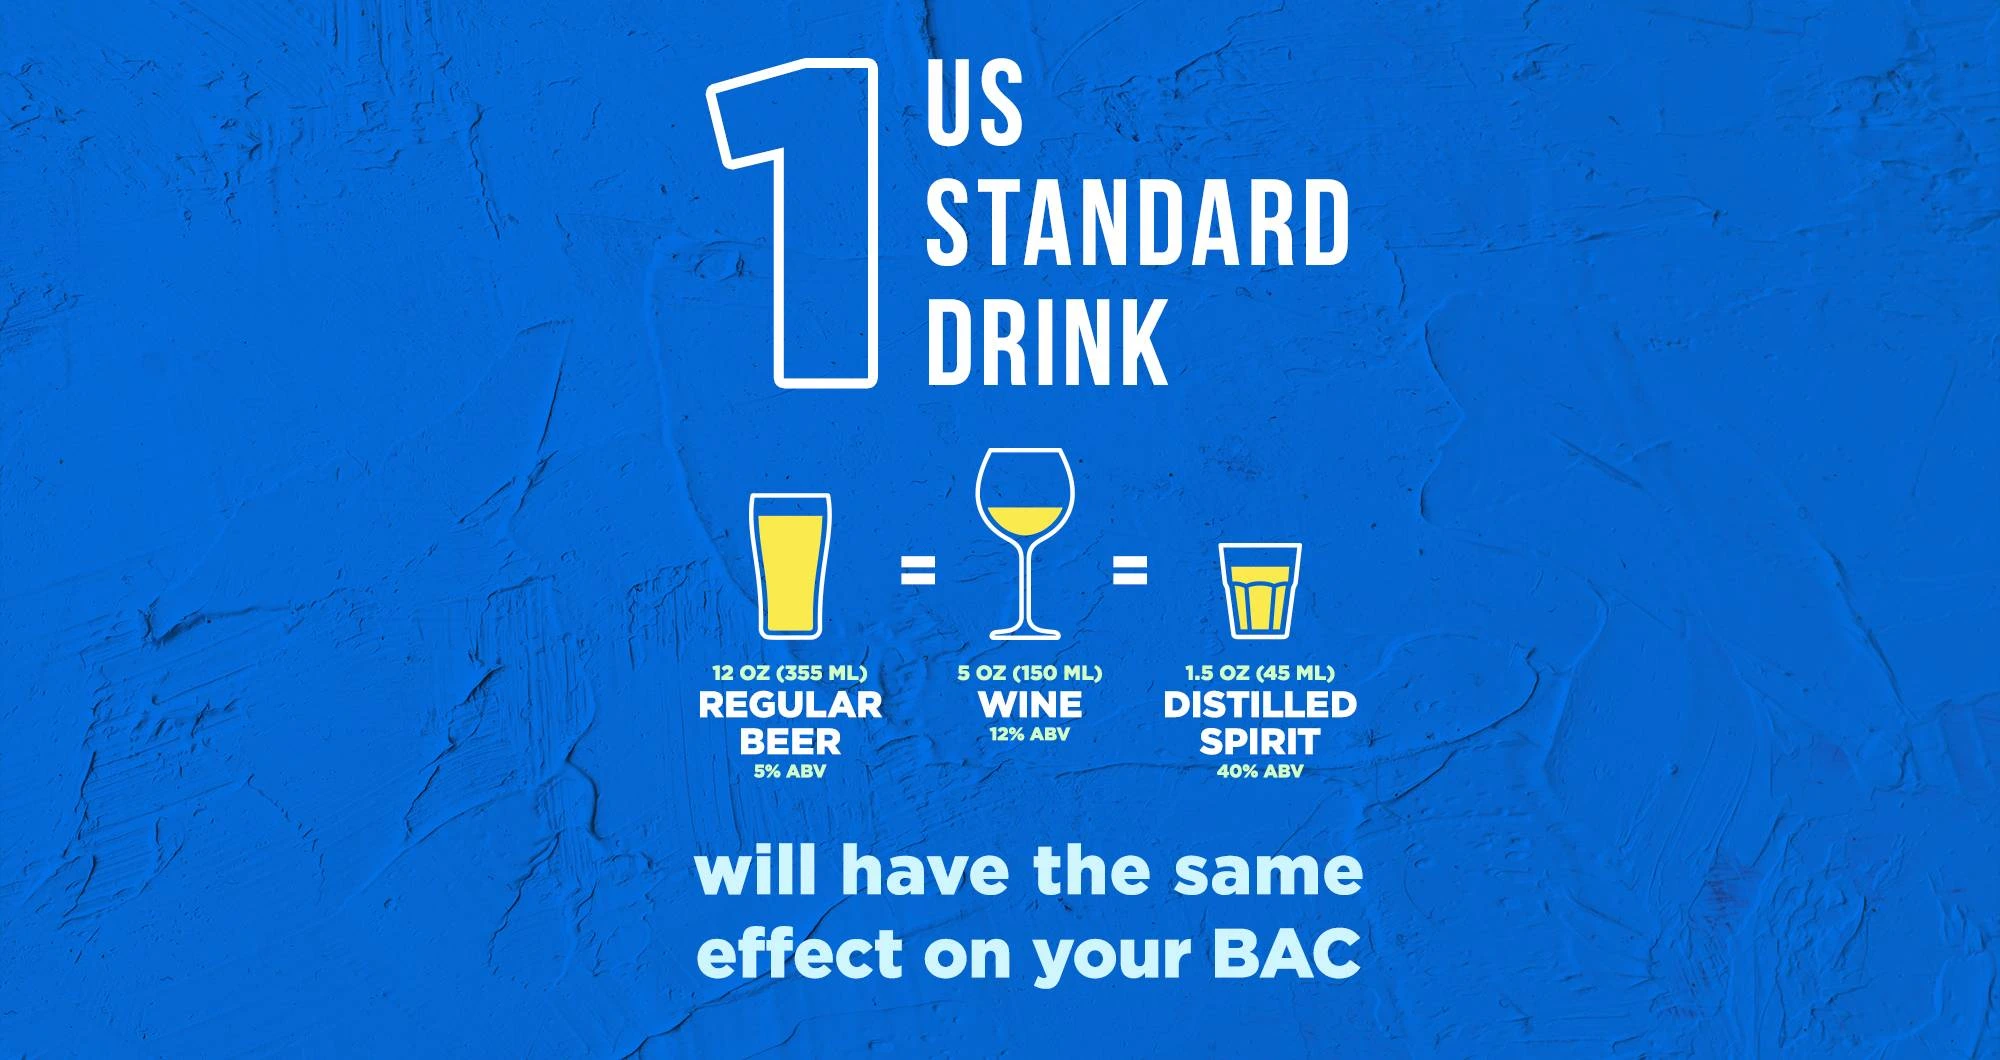 One standard drink Blood alcohol consumption